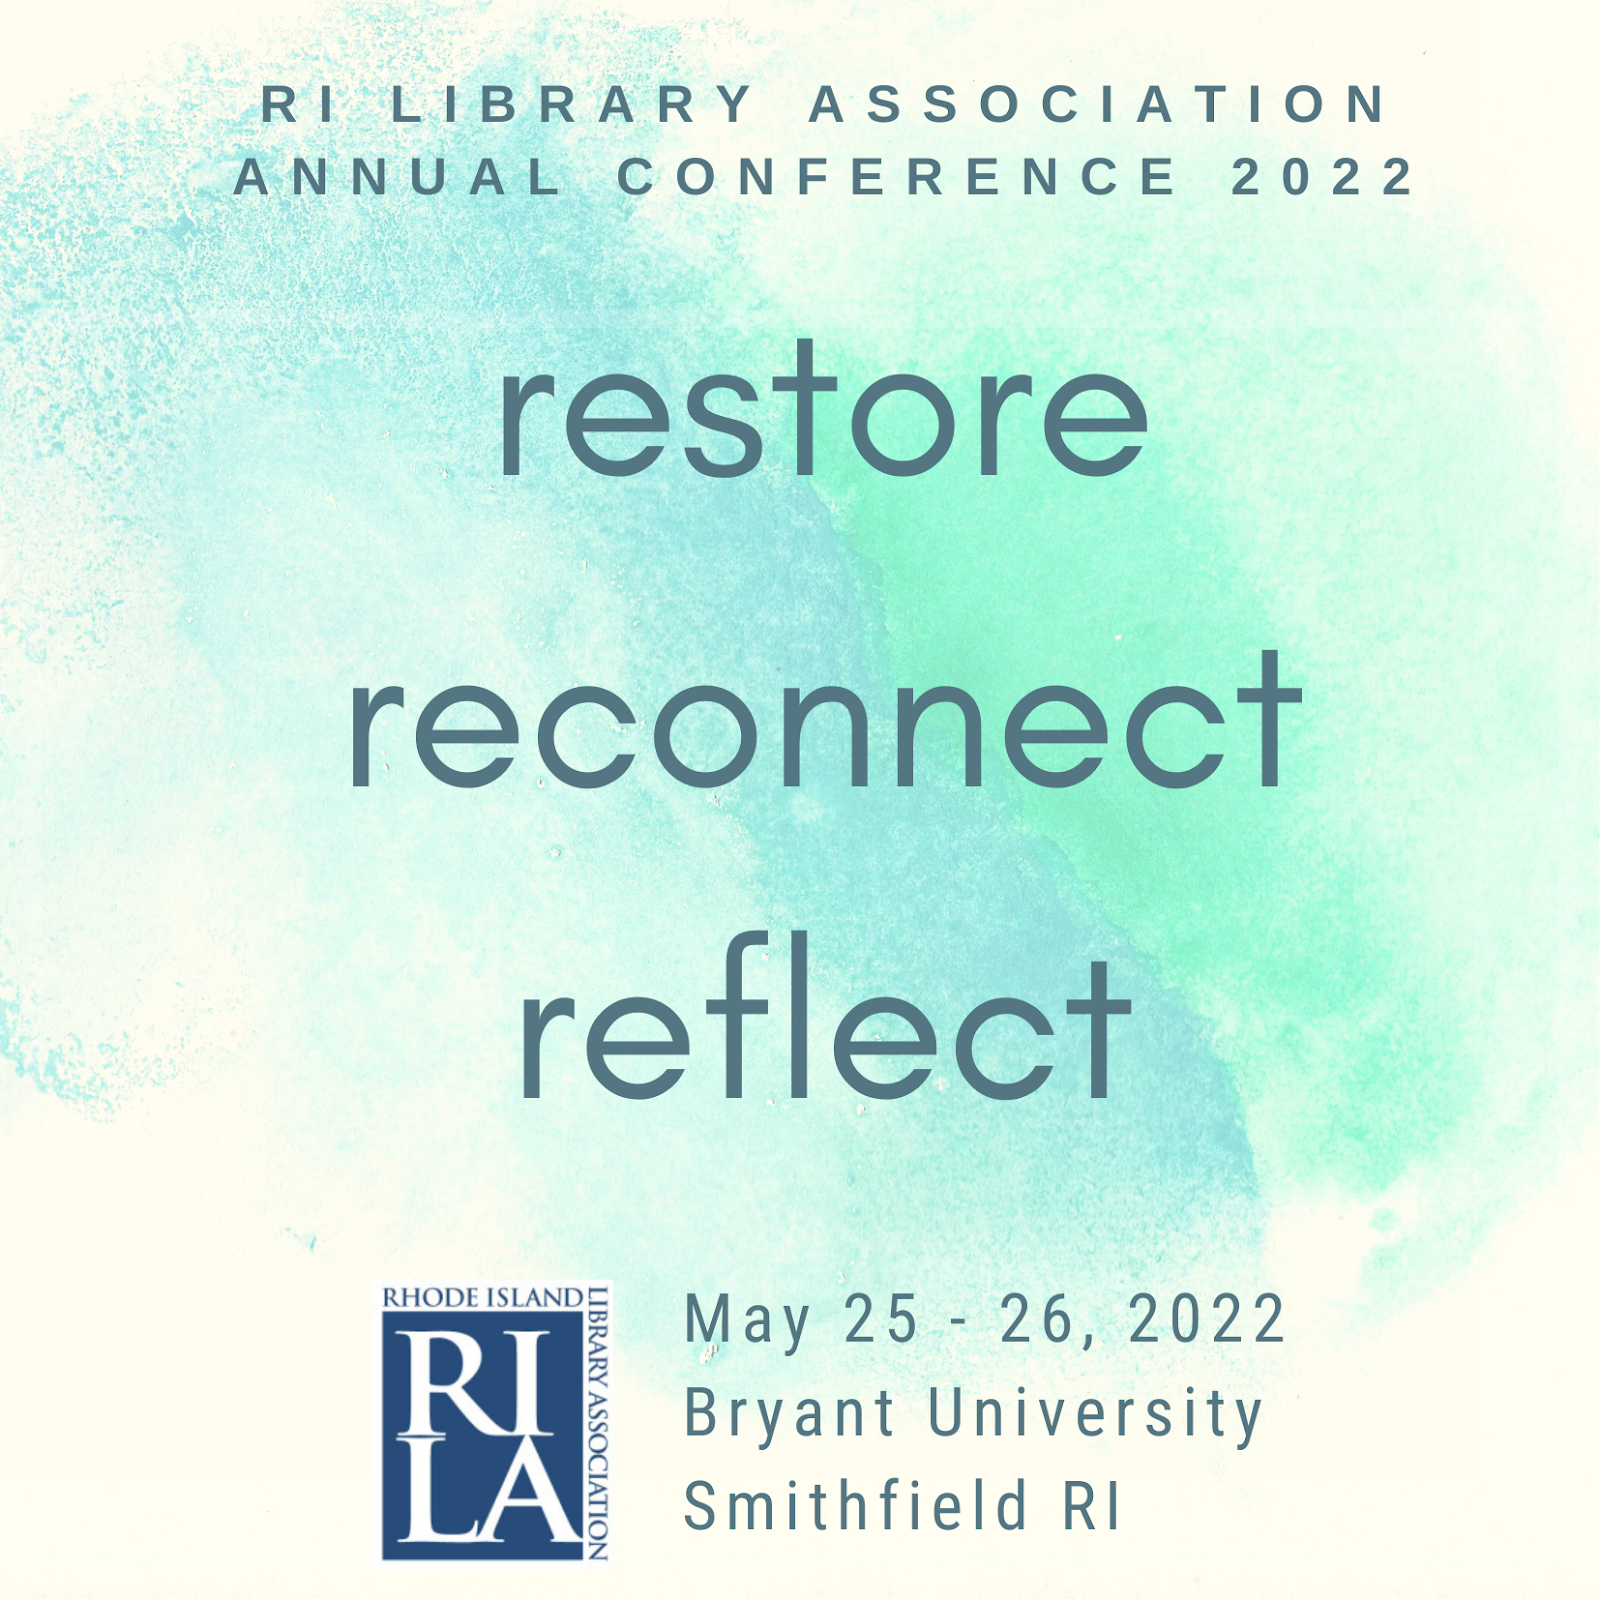 [Gray text on a watercolor blue-green background] RI Library Association Annual Conference. Restore, reconnect, reflect. May 25 - 26, 2022, Bryant University, Smithfield RI.